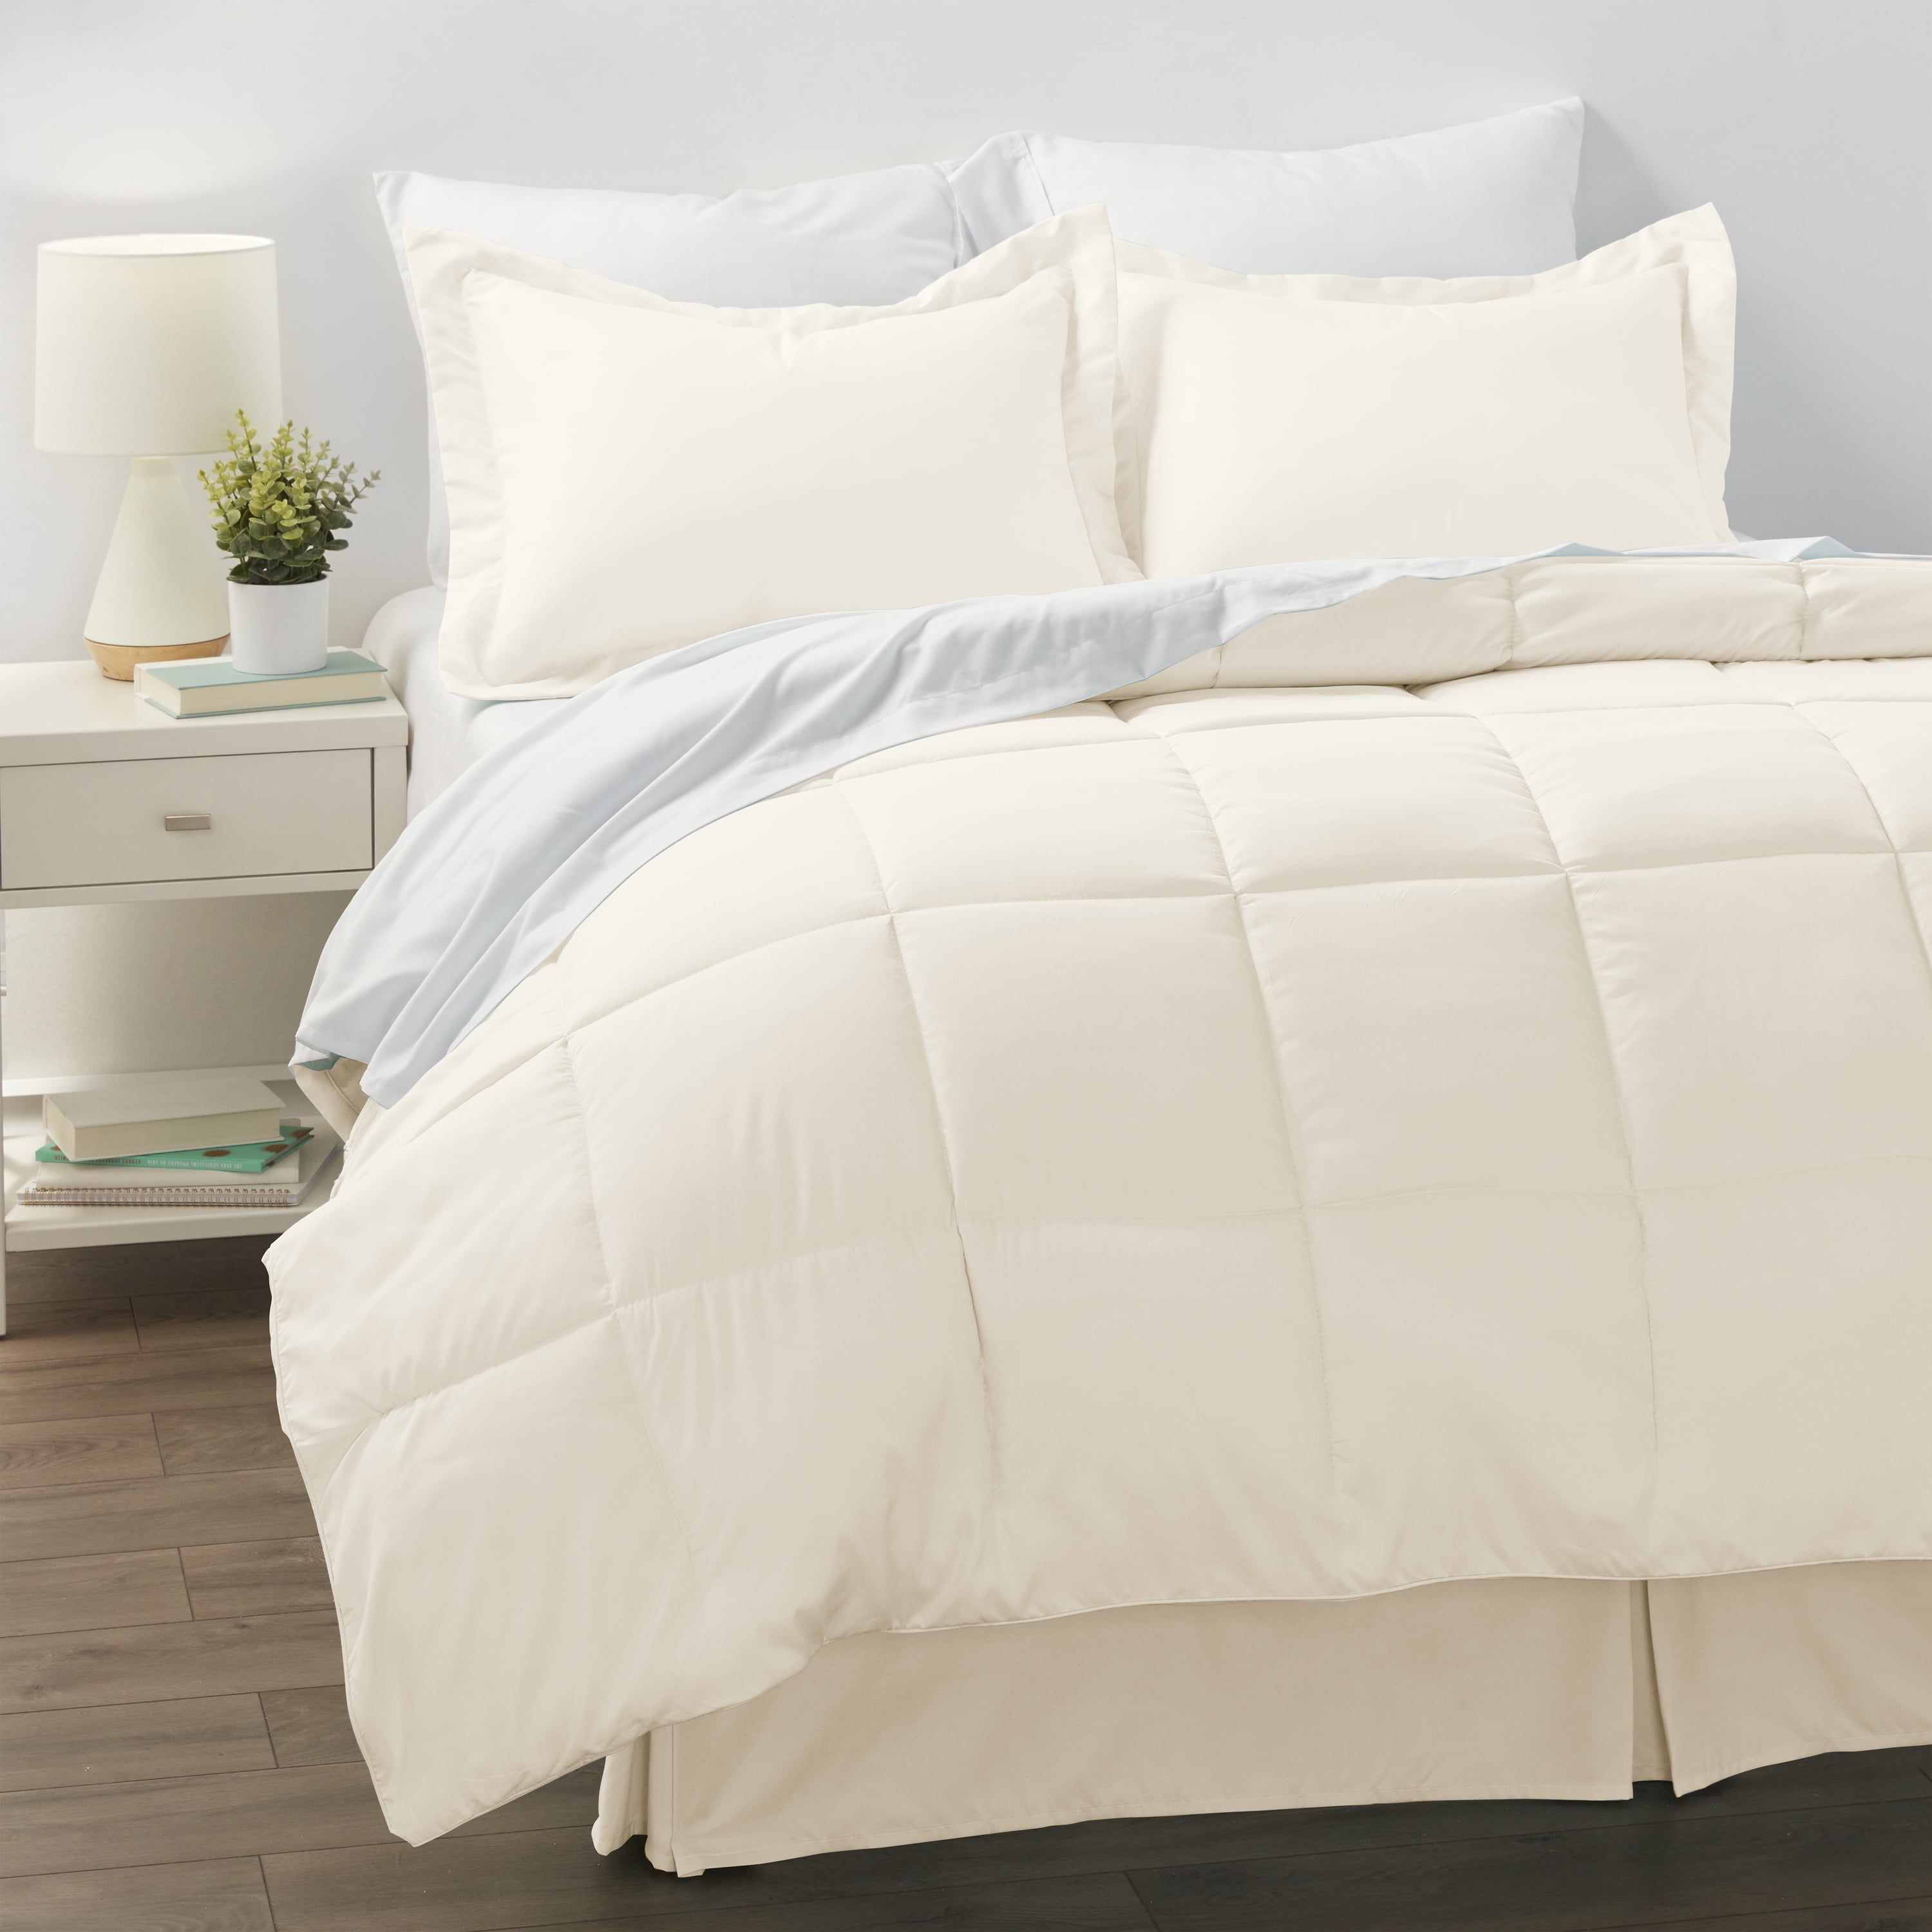 Details about   Elegant Comforter  Luxury Softest 8 Pieces Bed-in-a-Bag Comforter Set Queen King 